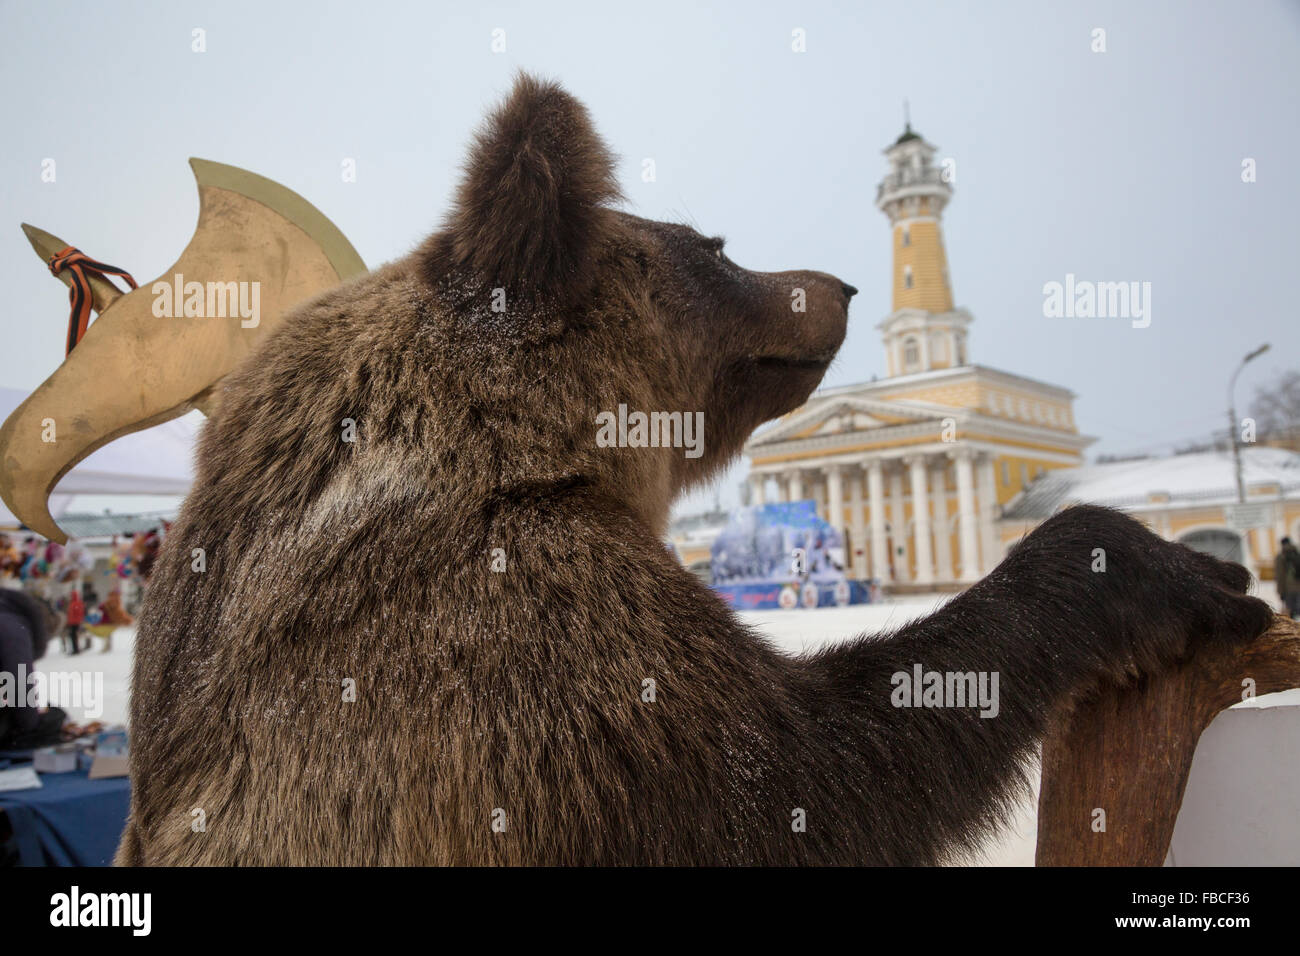 Stuffed bear with a wooden ax stands on the central Susanin square in Kostroma town, Russia Stock Photo